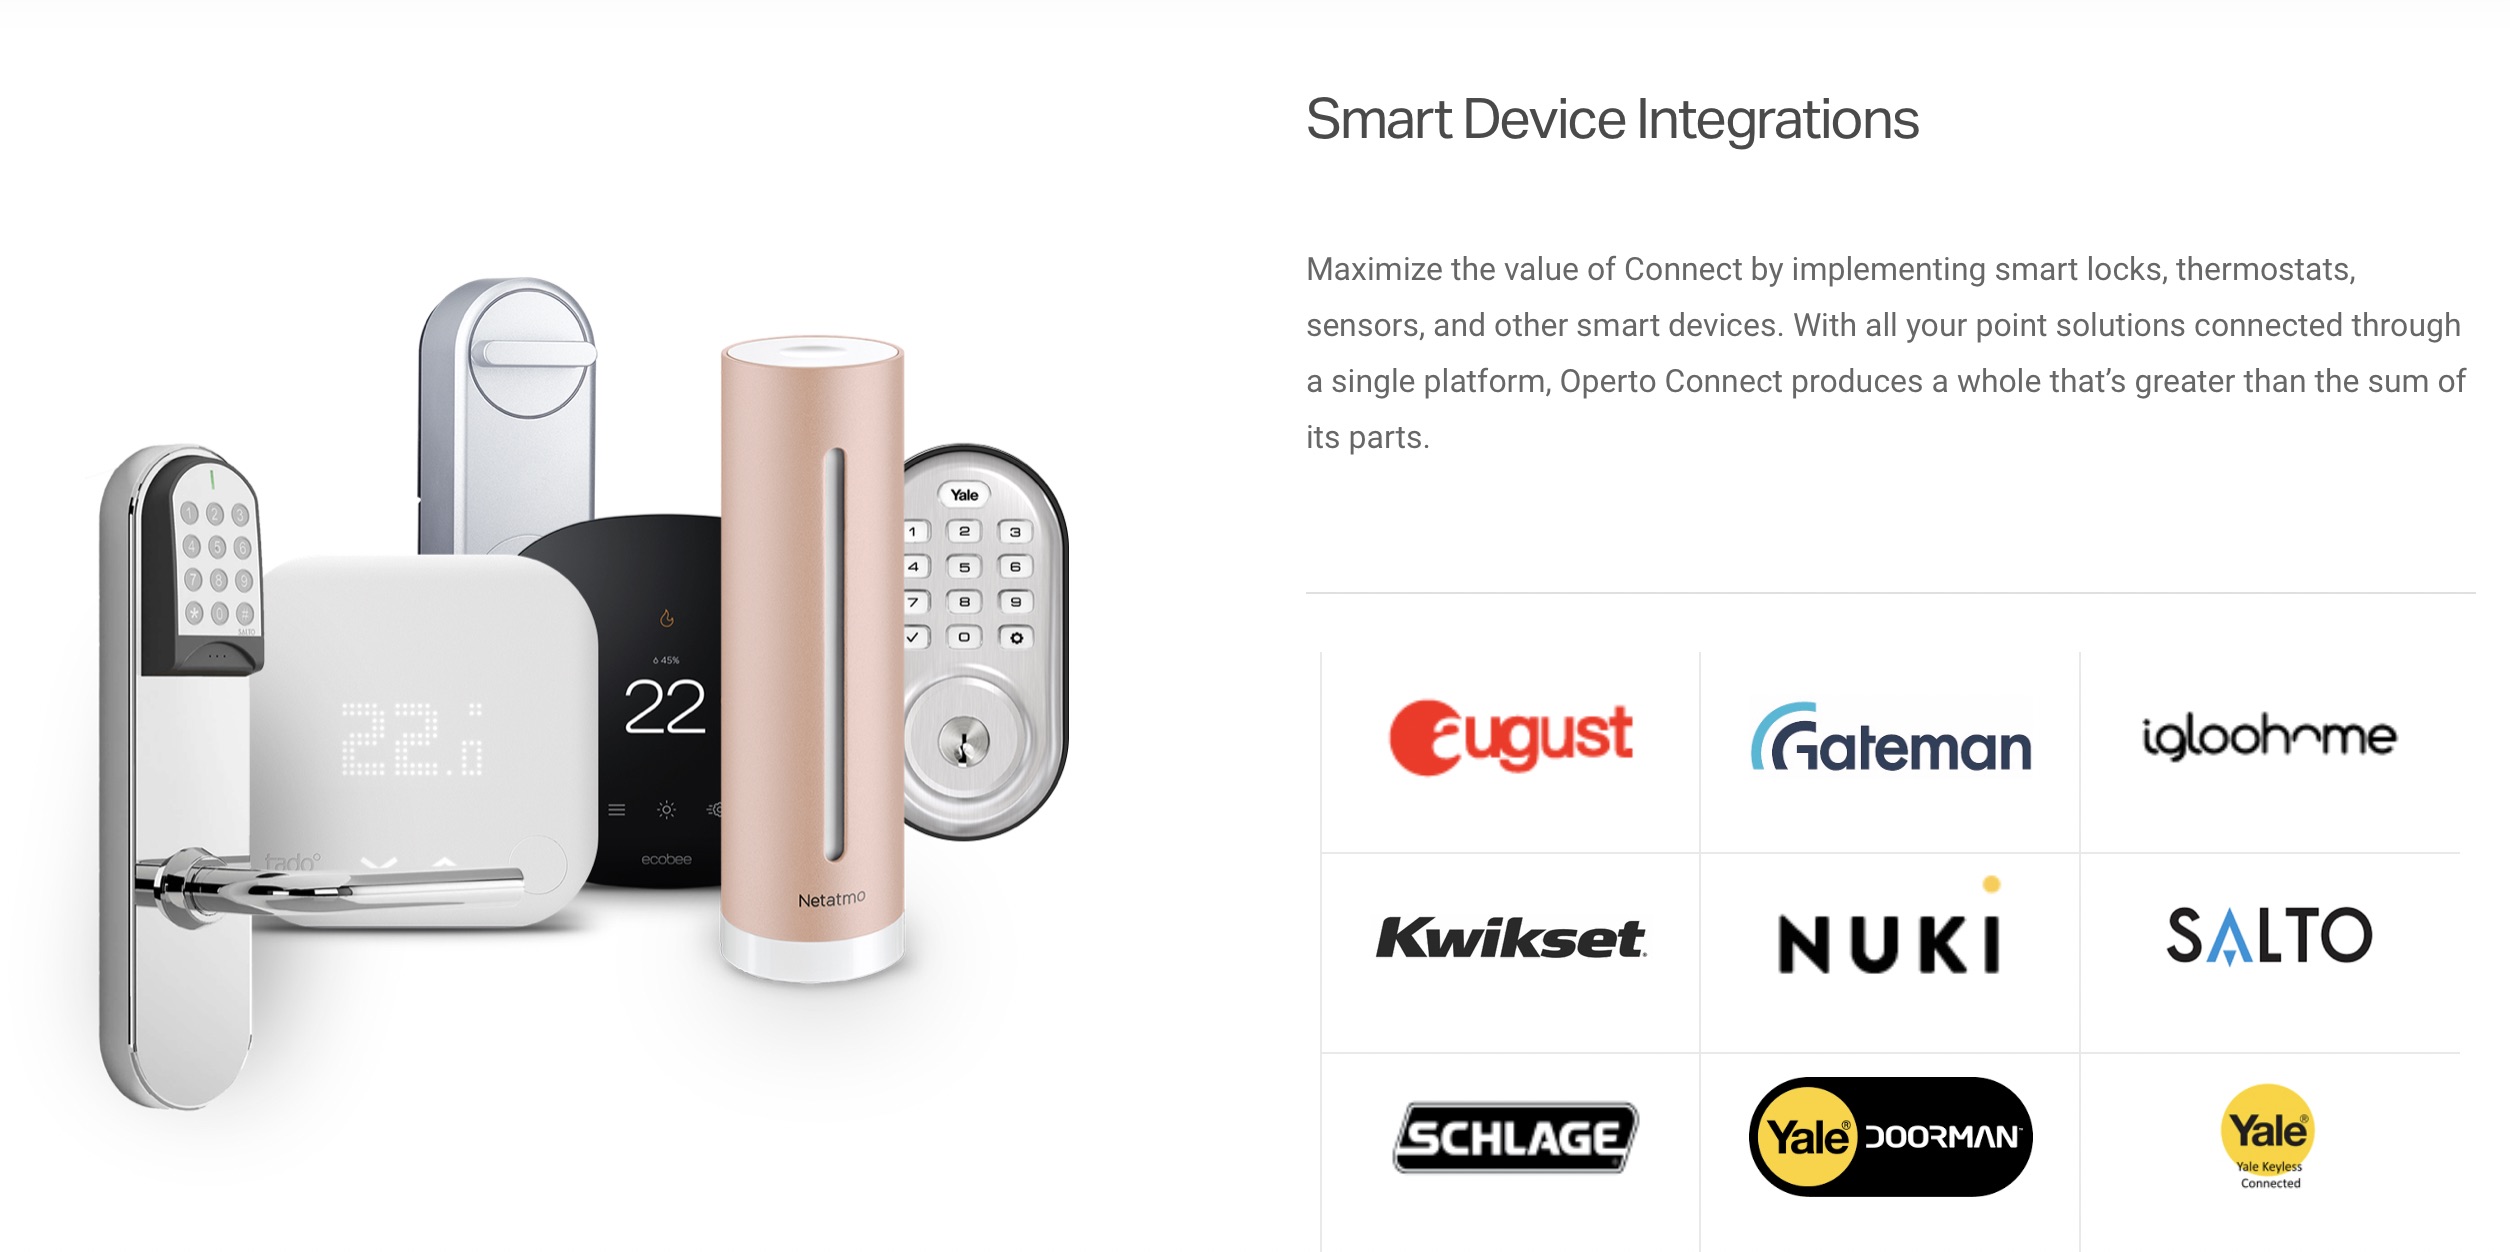 An image showing an example of Operto smart device and keyless entry for rental property integrations.